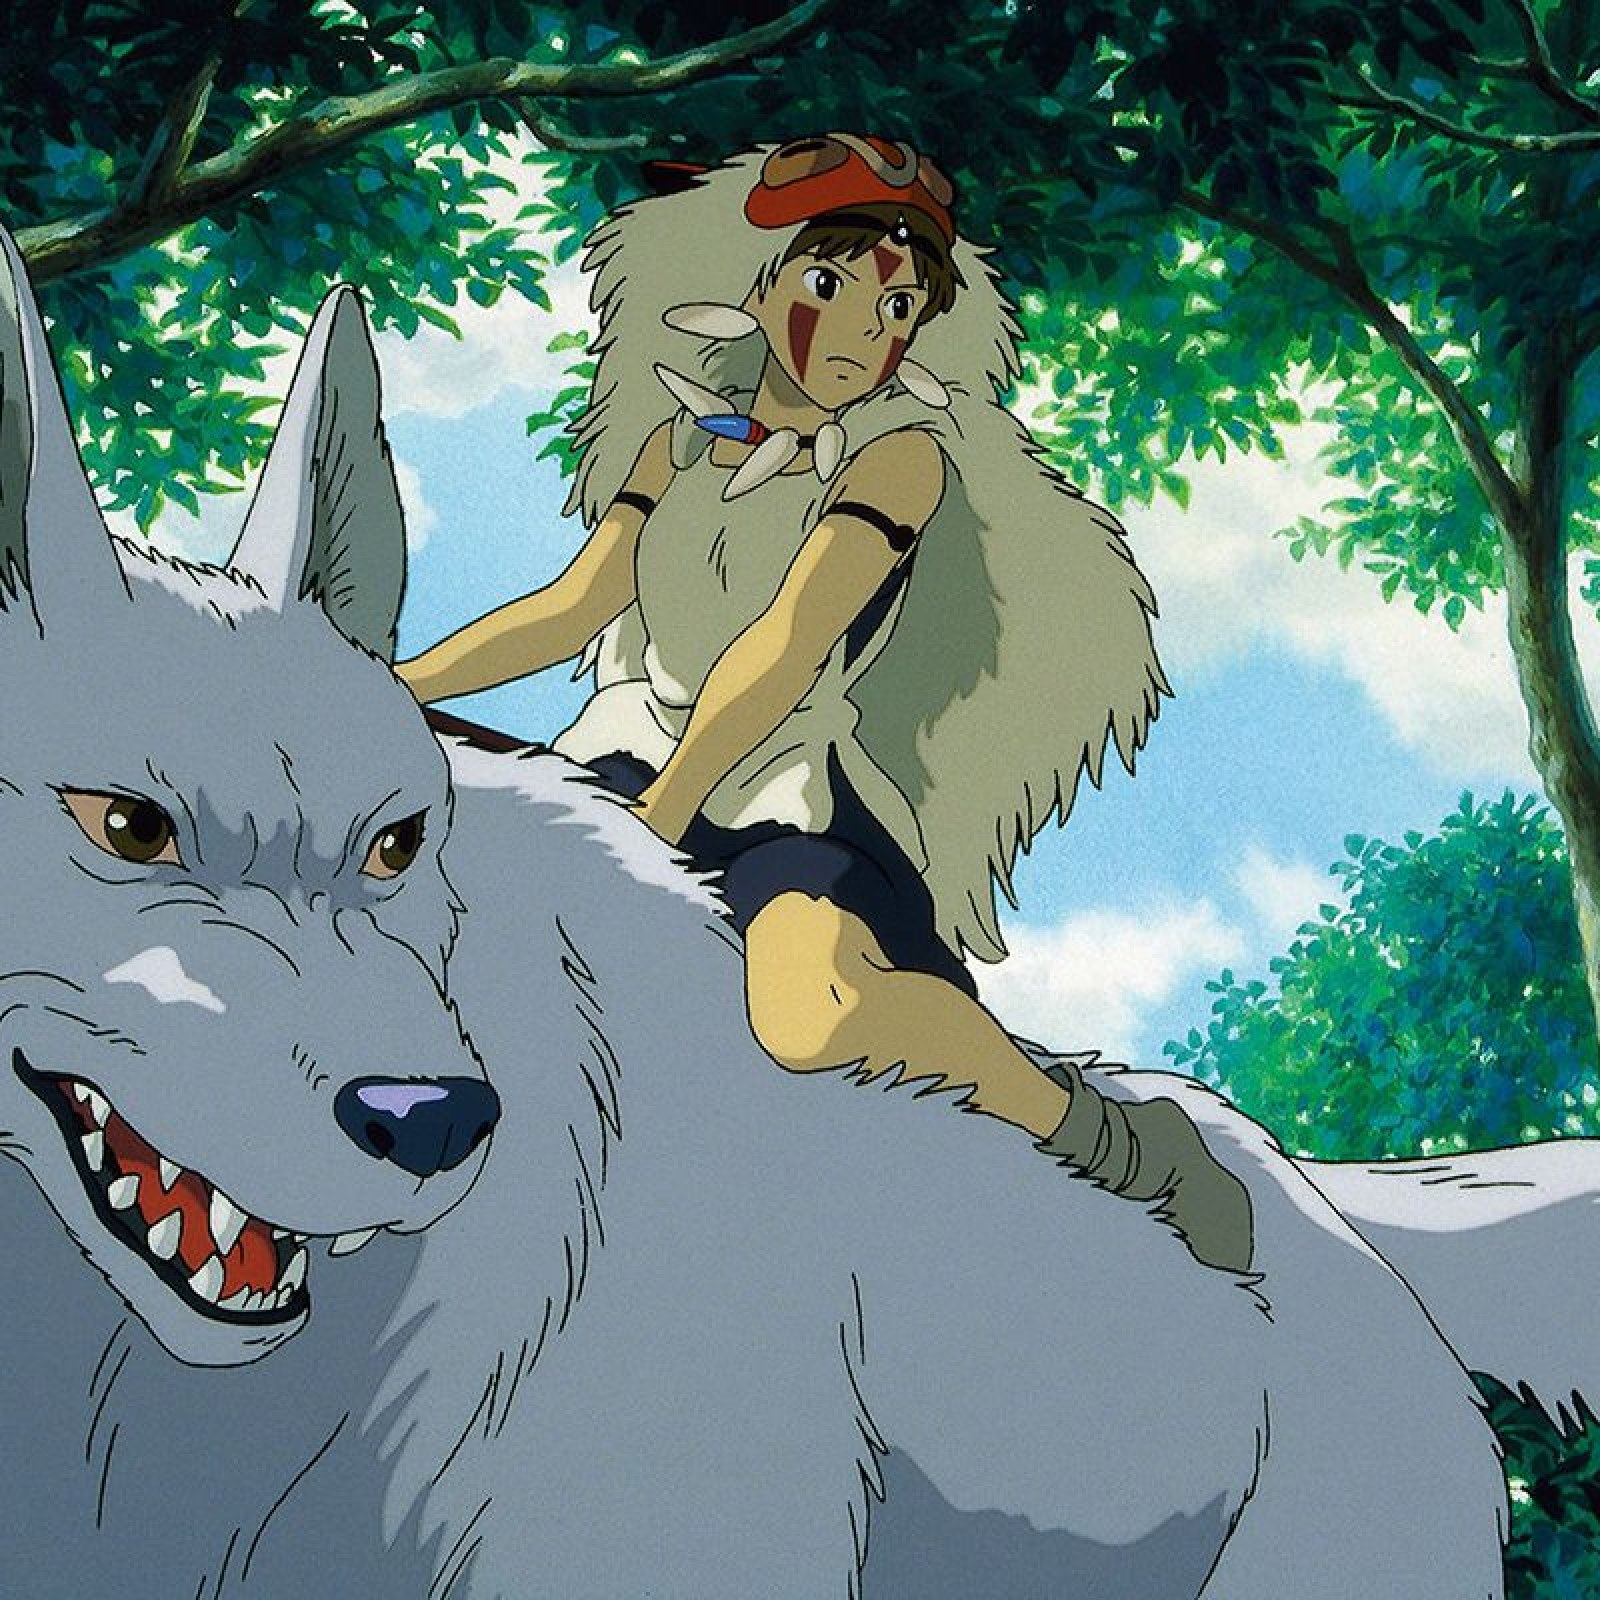 Ranked: The 50 Best Anime Movies, According to Critics